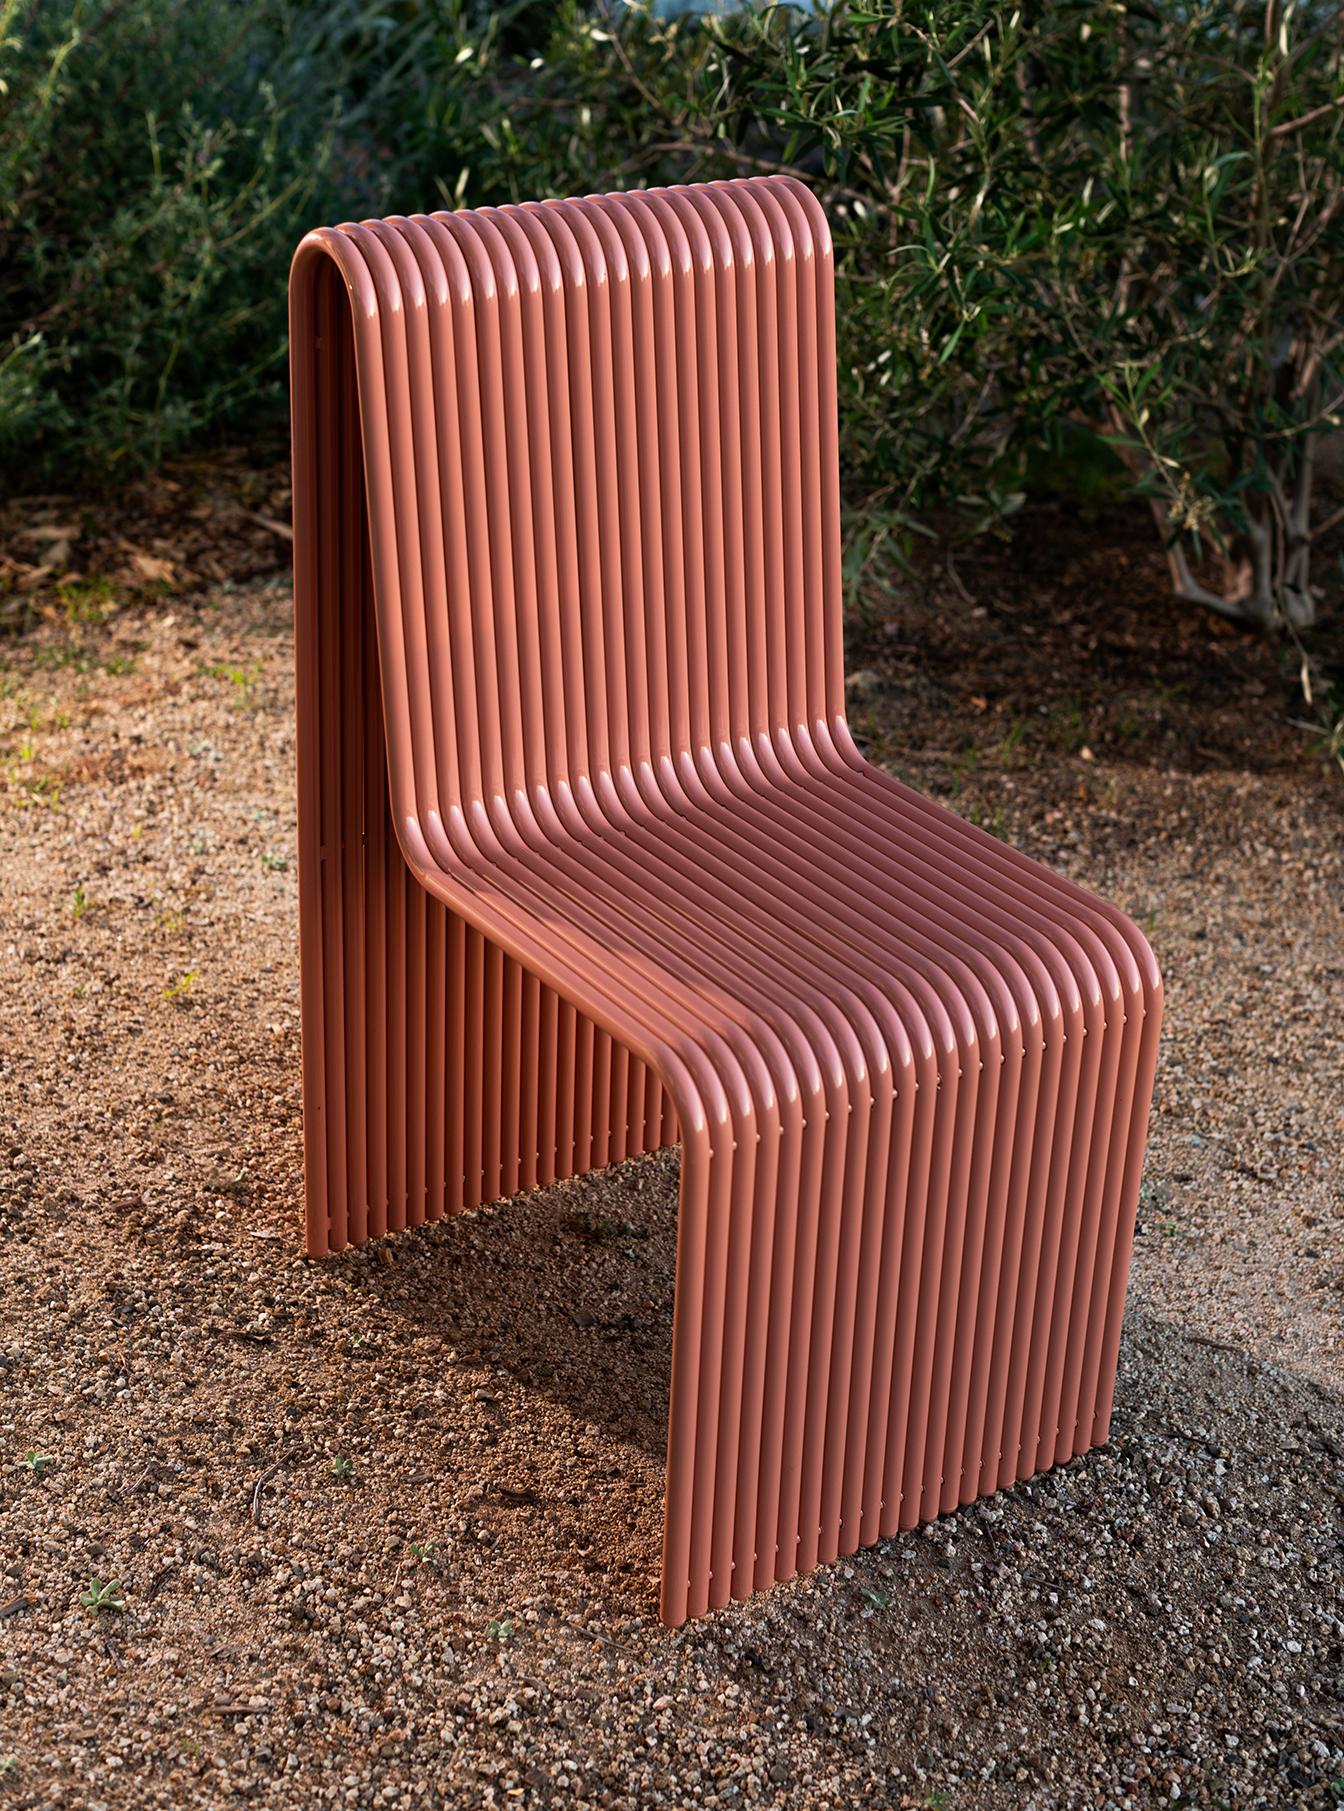 Simultaneously delicate and bold, the Ribbon stool is a playful addition to Laun's outdoor furniture catalog. The layered aluminum tubes stack together to form a solid array and allows for custom widths in an infinite combination of forms.

The